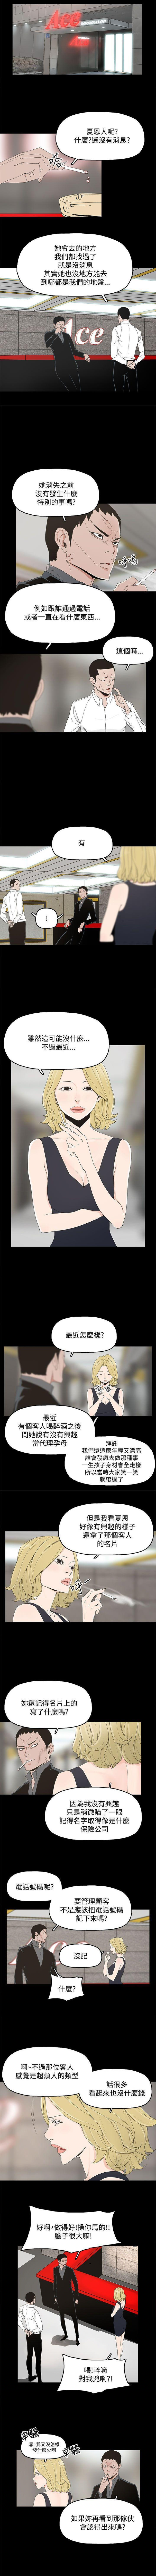 Camshow 代理孕母 7 [Chinese] Manhwa Hot Girl Fucking - Page 6